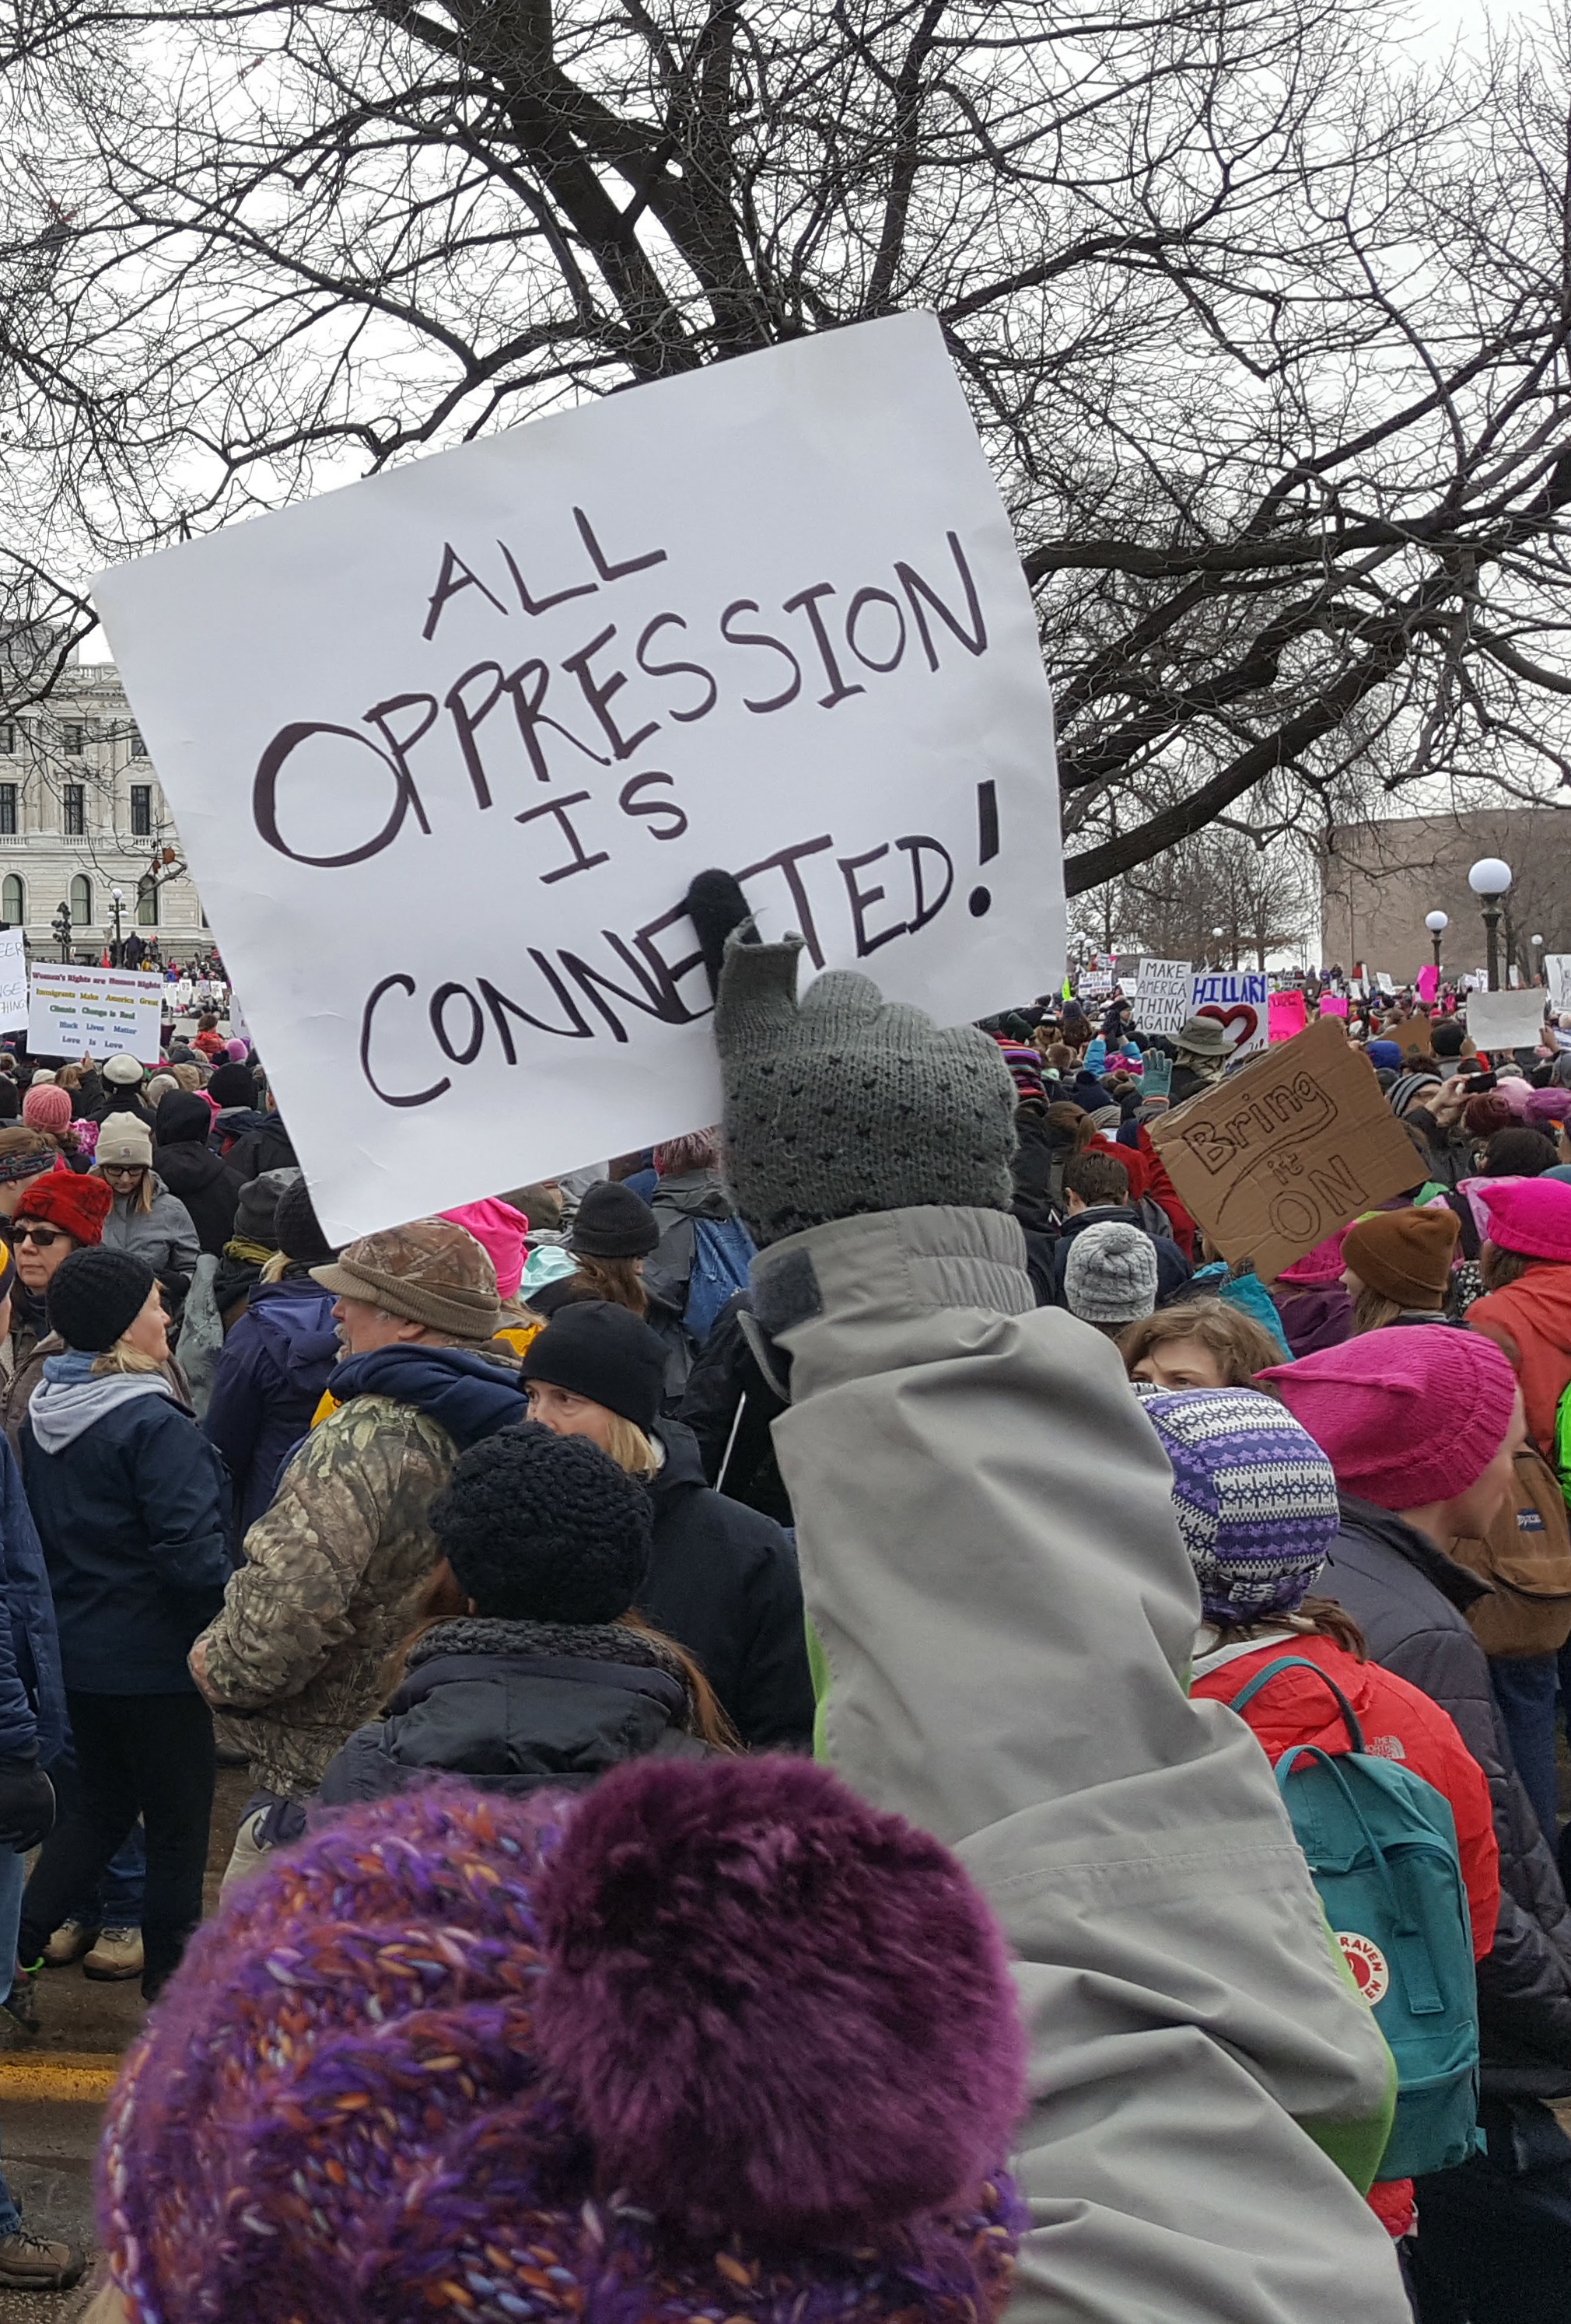 Women's March on Washington: MN. All oppression is connected.